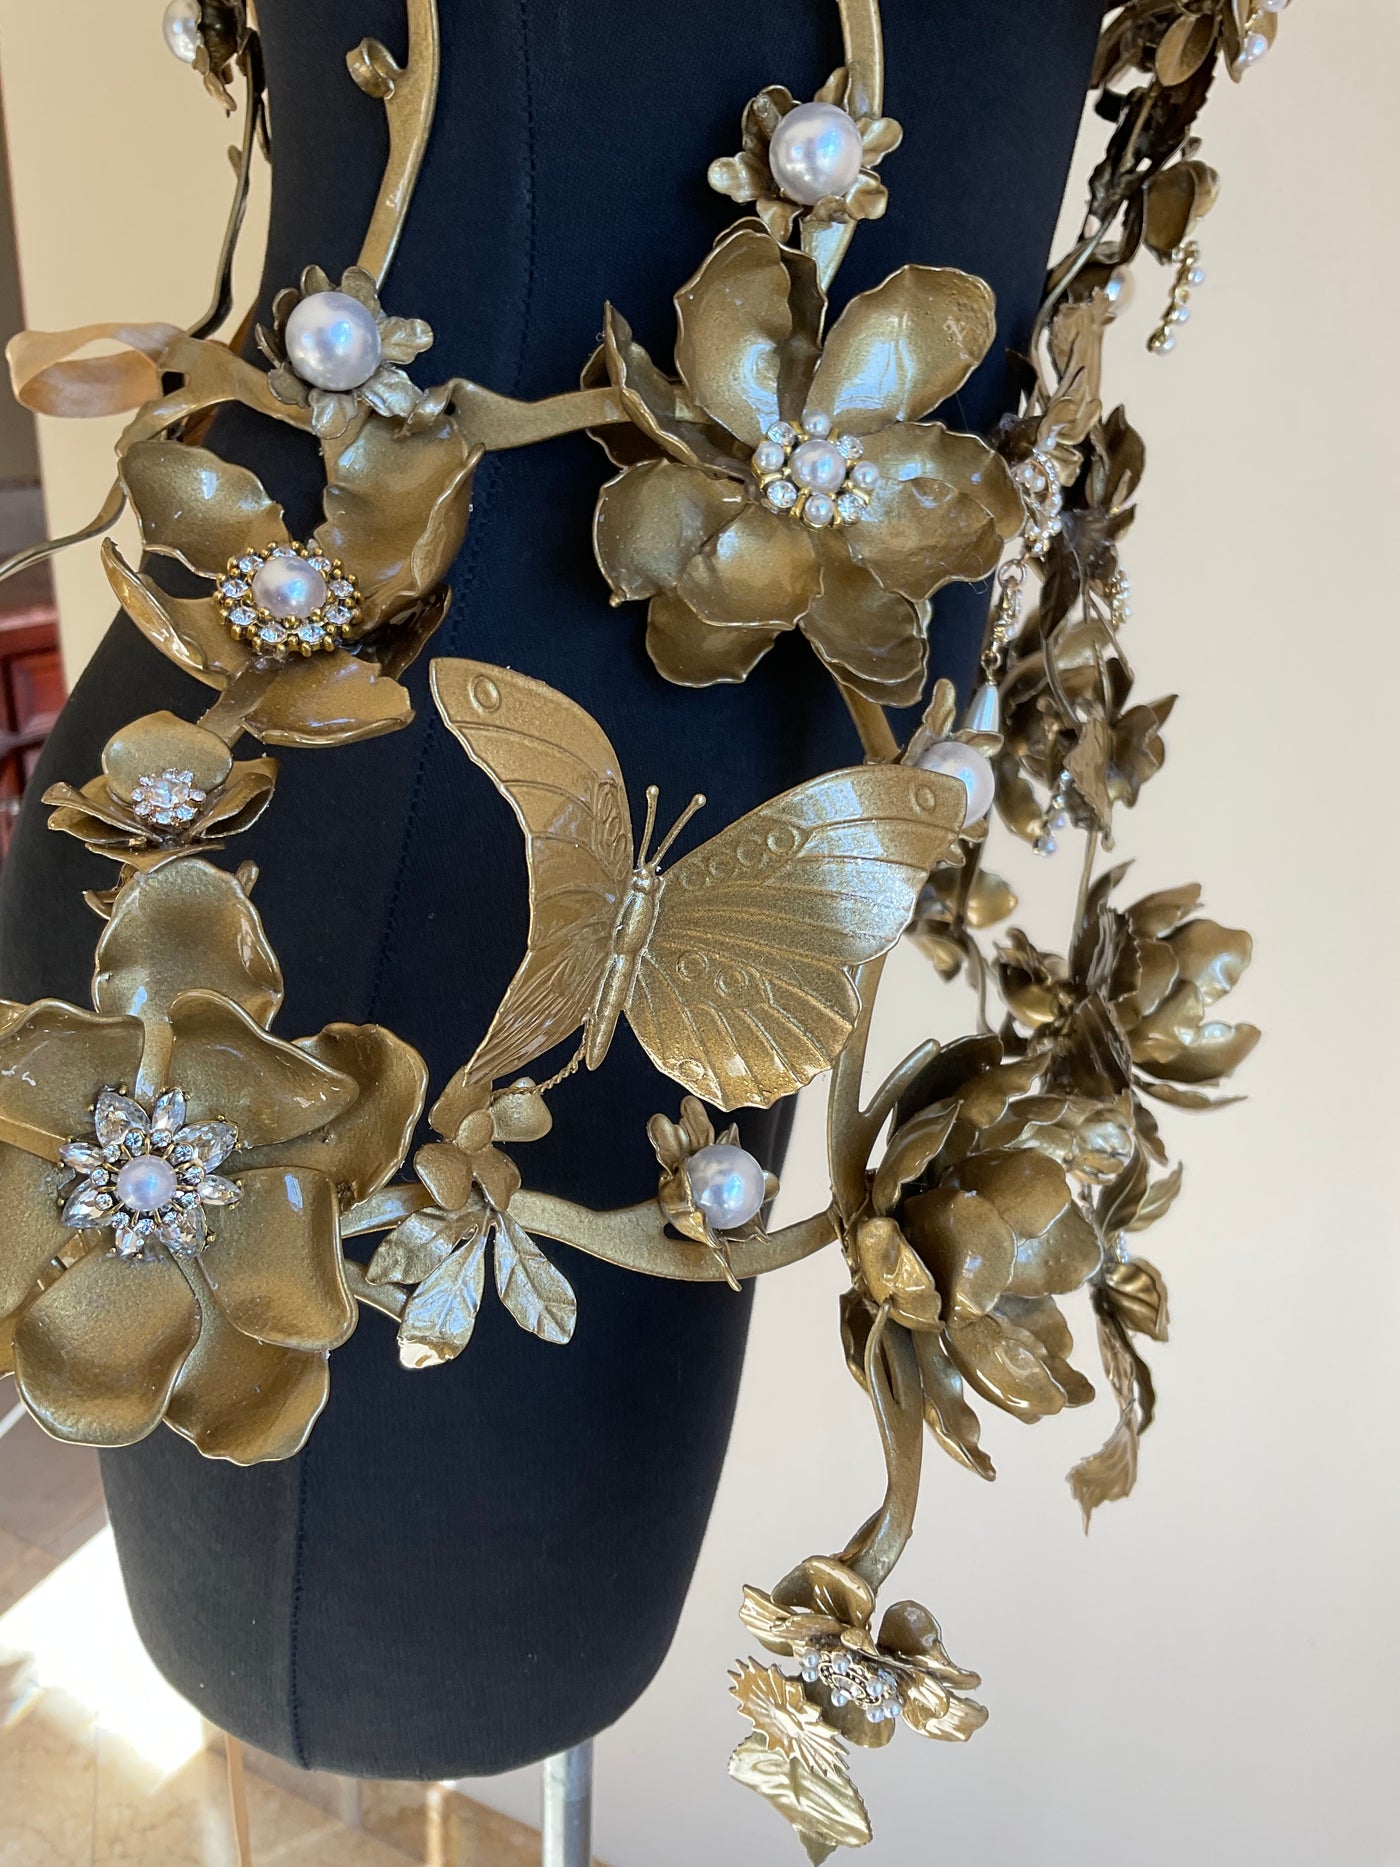 ROYAL GILDED GARDEN CORSET and matching crown